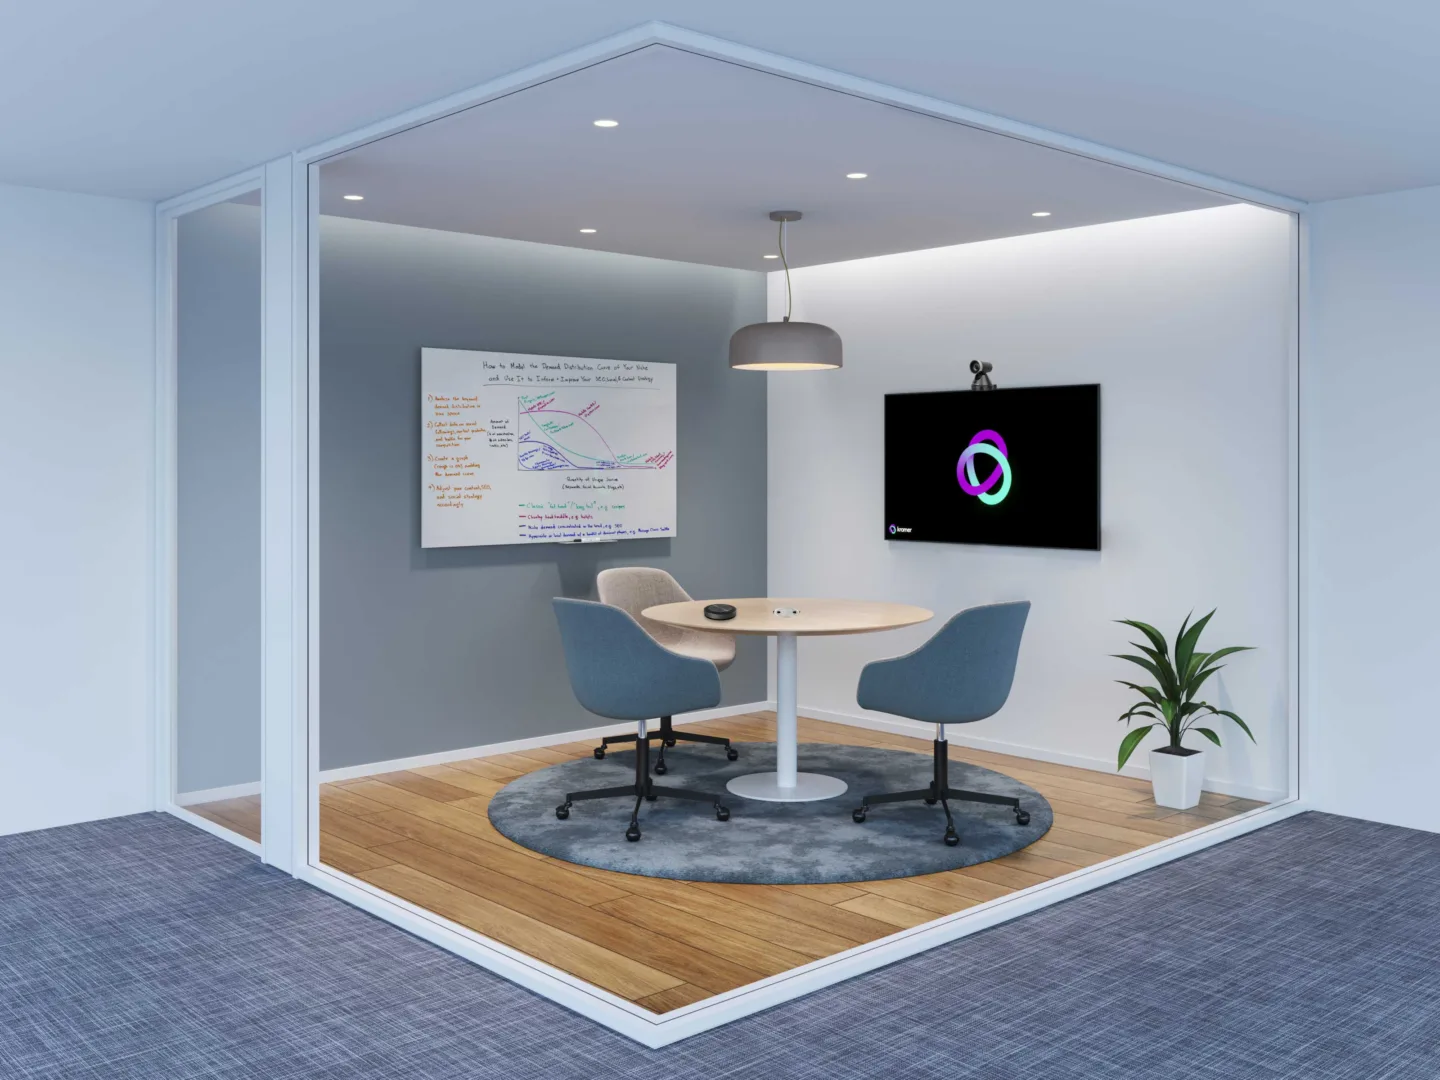 Wired huddle room with Kramer's solutions installed in it